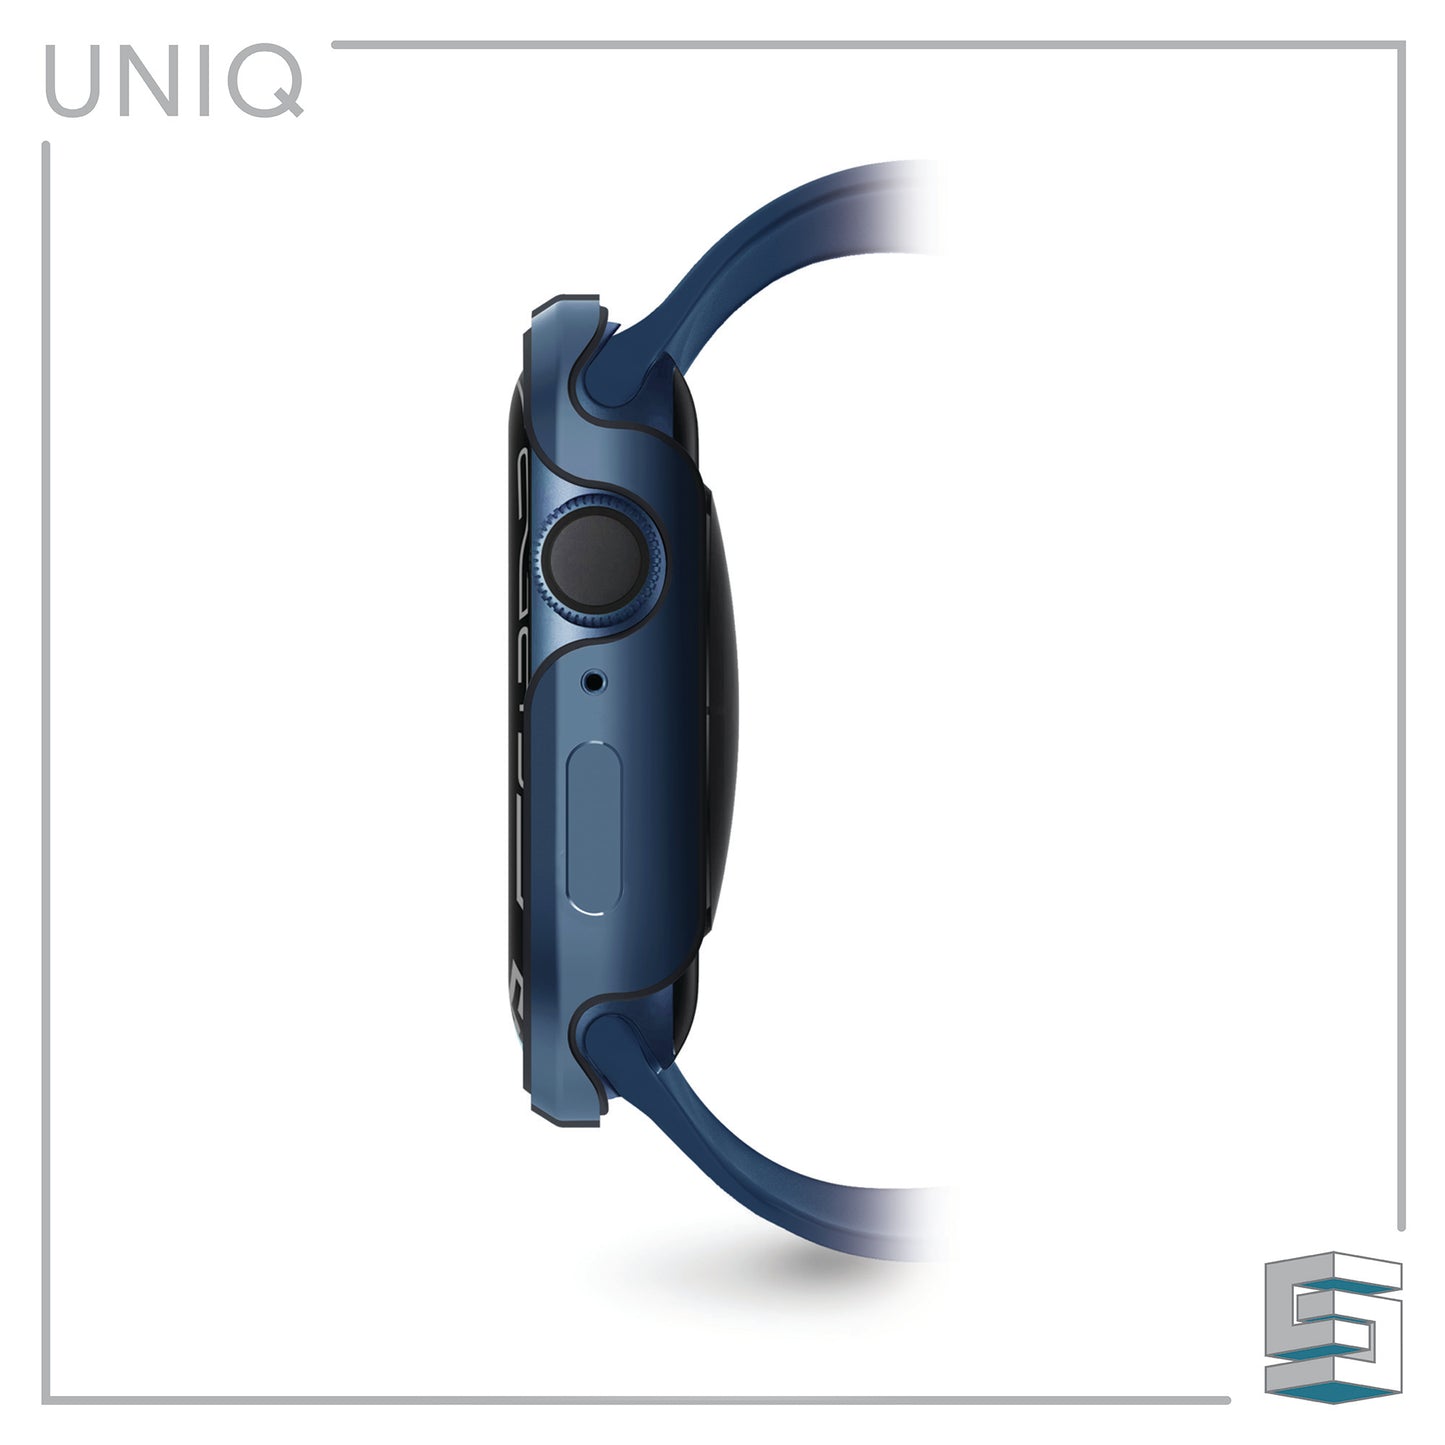 Case for Apple Watch series 7/8 - UNIQ Valencia Global Synergy Concepts